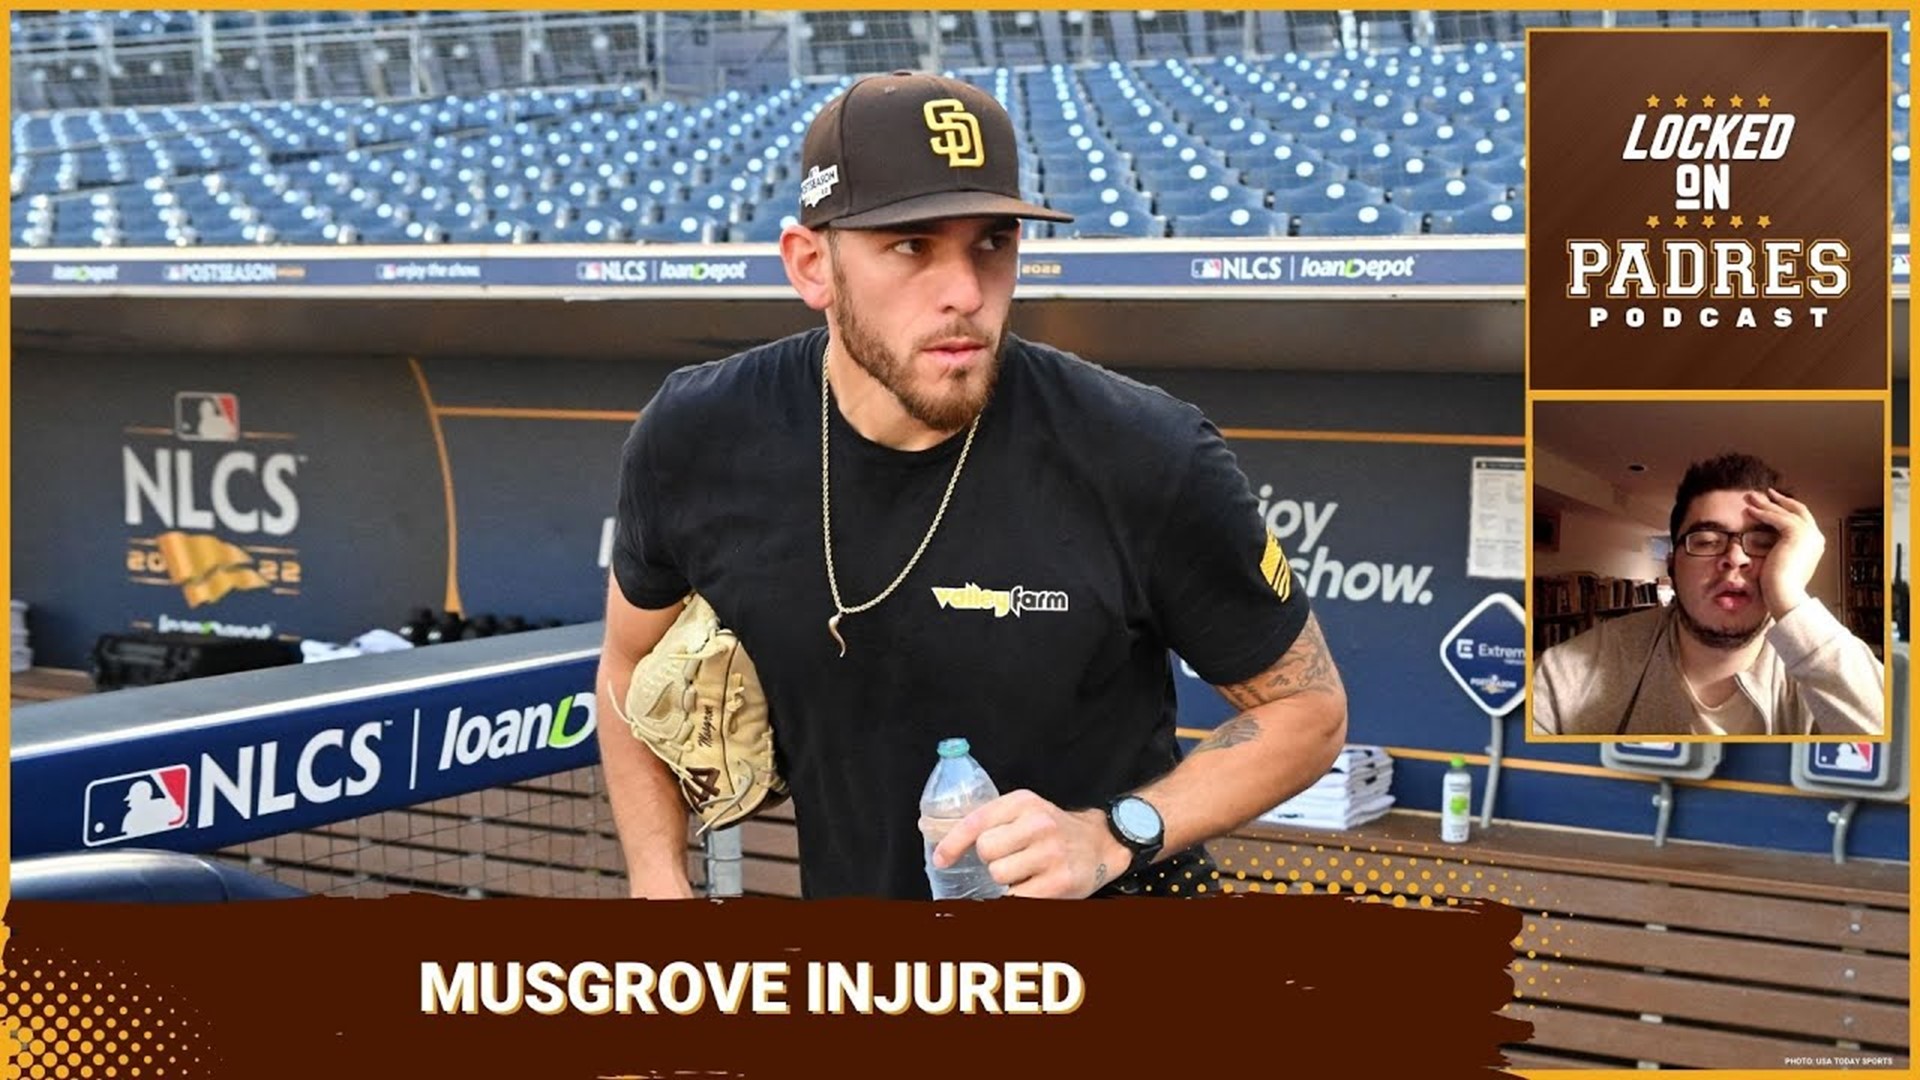 Javier reacts to the news that star pitcher Joe Musgrove fractured his toe in an apparent weight room accident. Is Musgrove in danger of missing opening day?